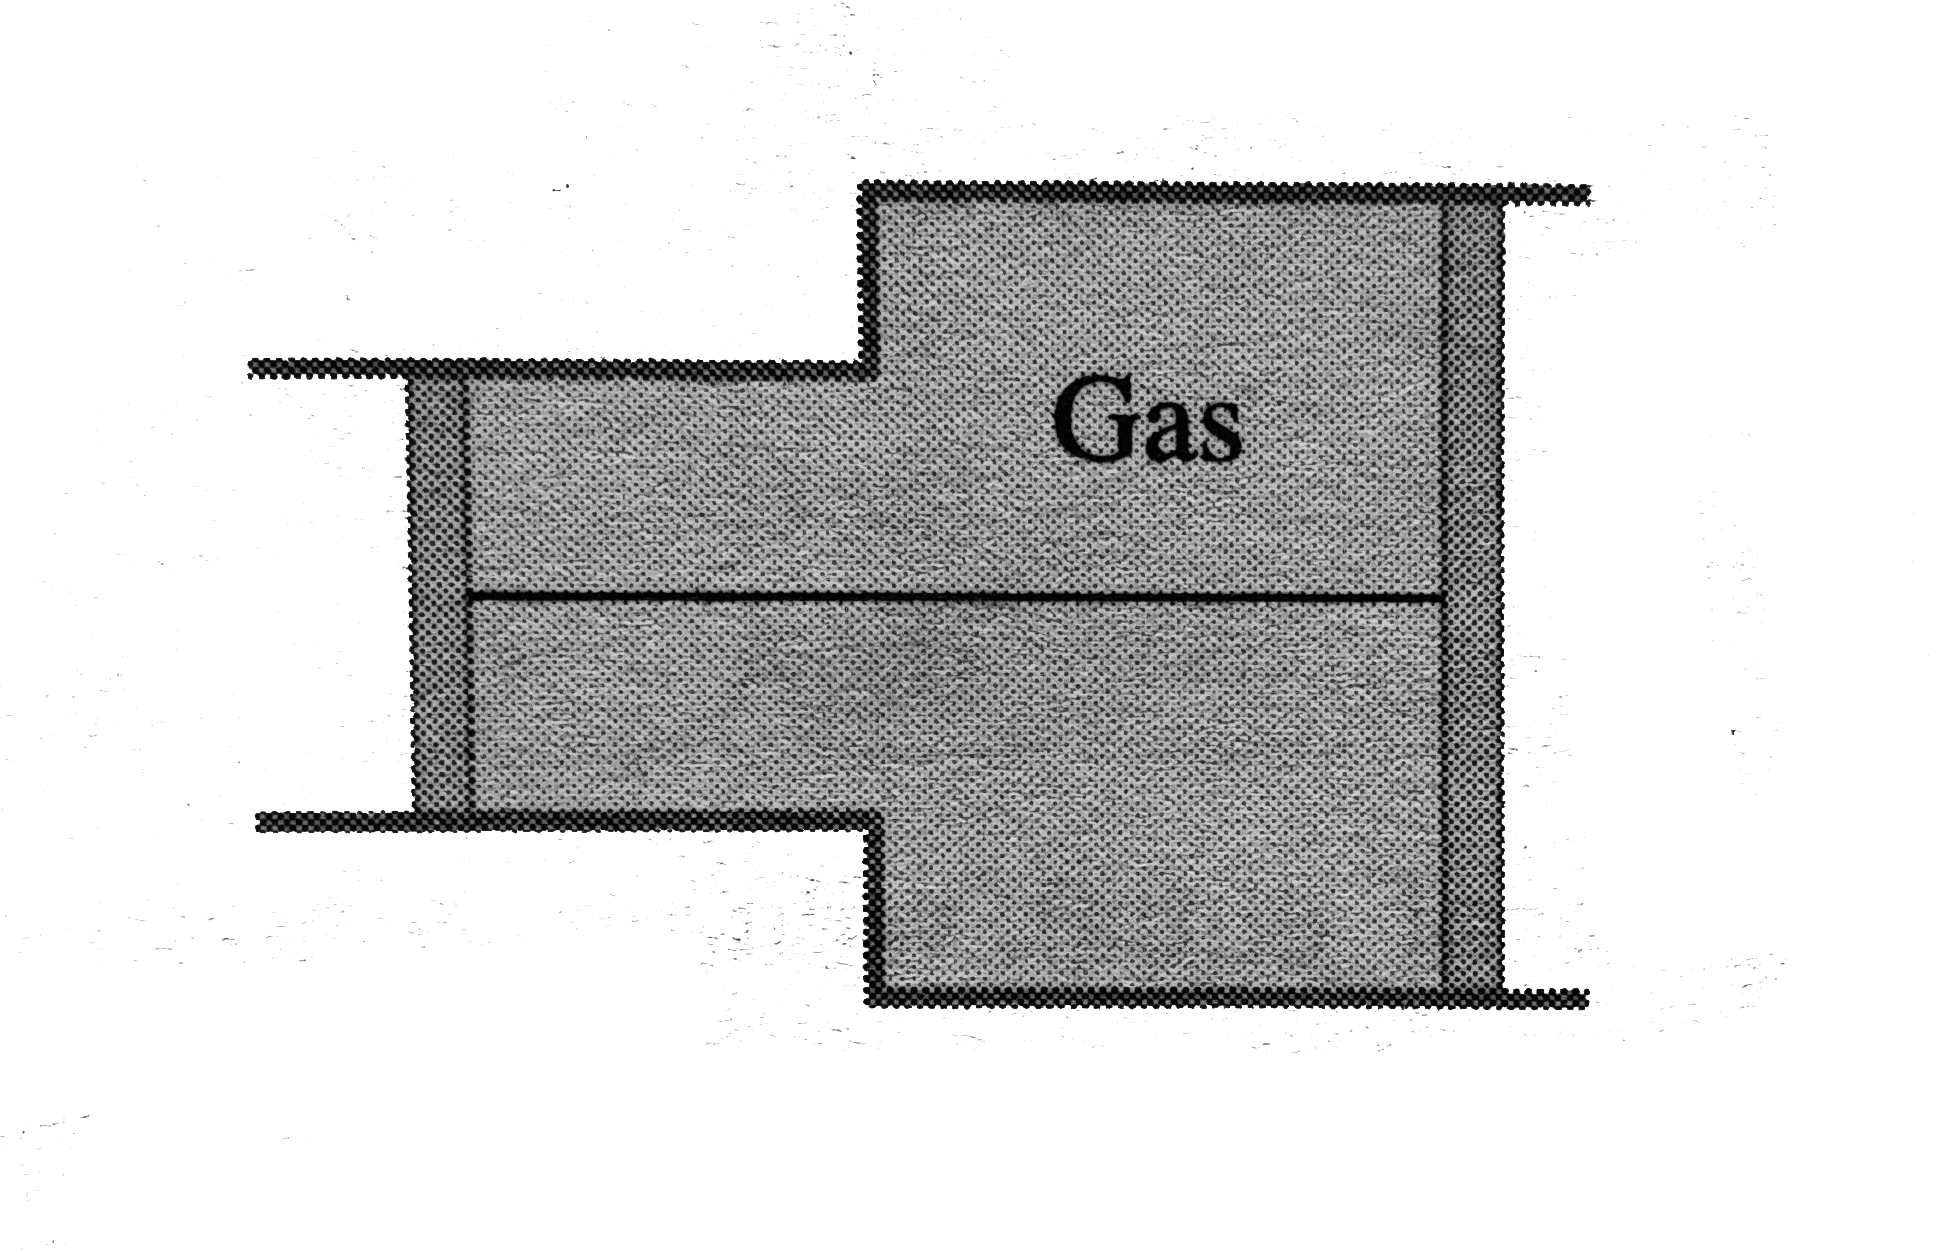 A gas is filled in the cylinder shown in fig. The two pistons are joined by a string. If the gas is heated, the right piston will